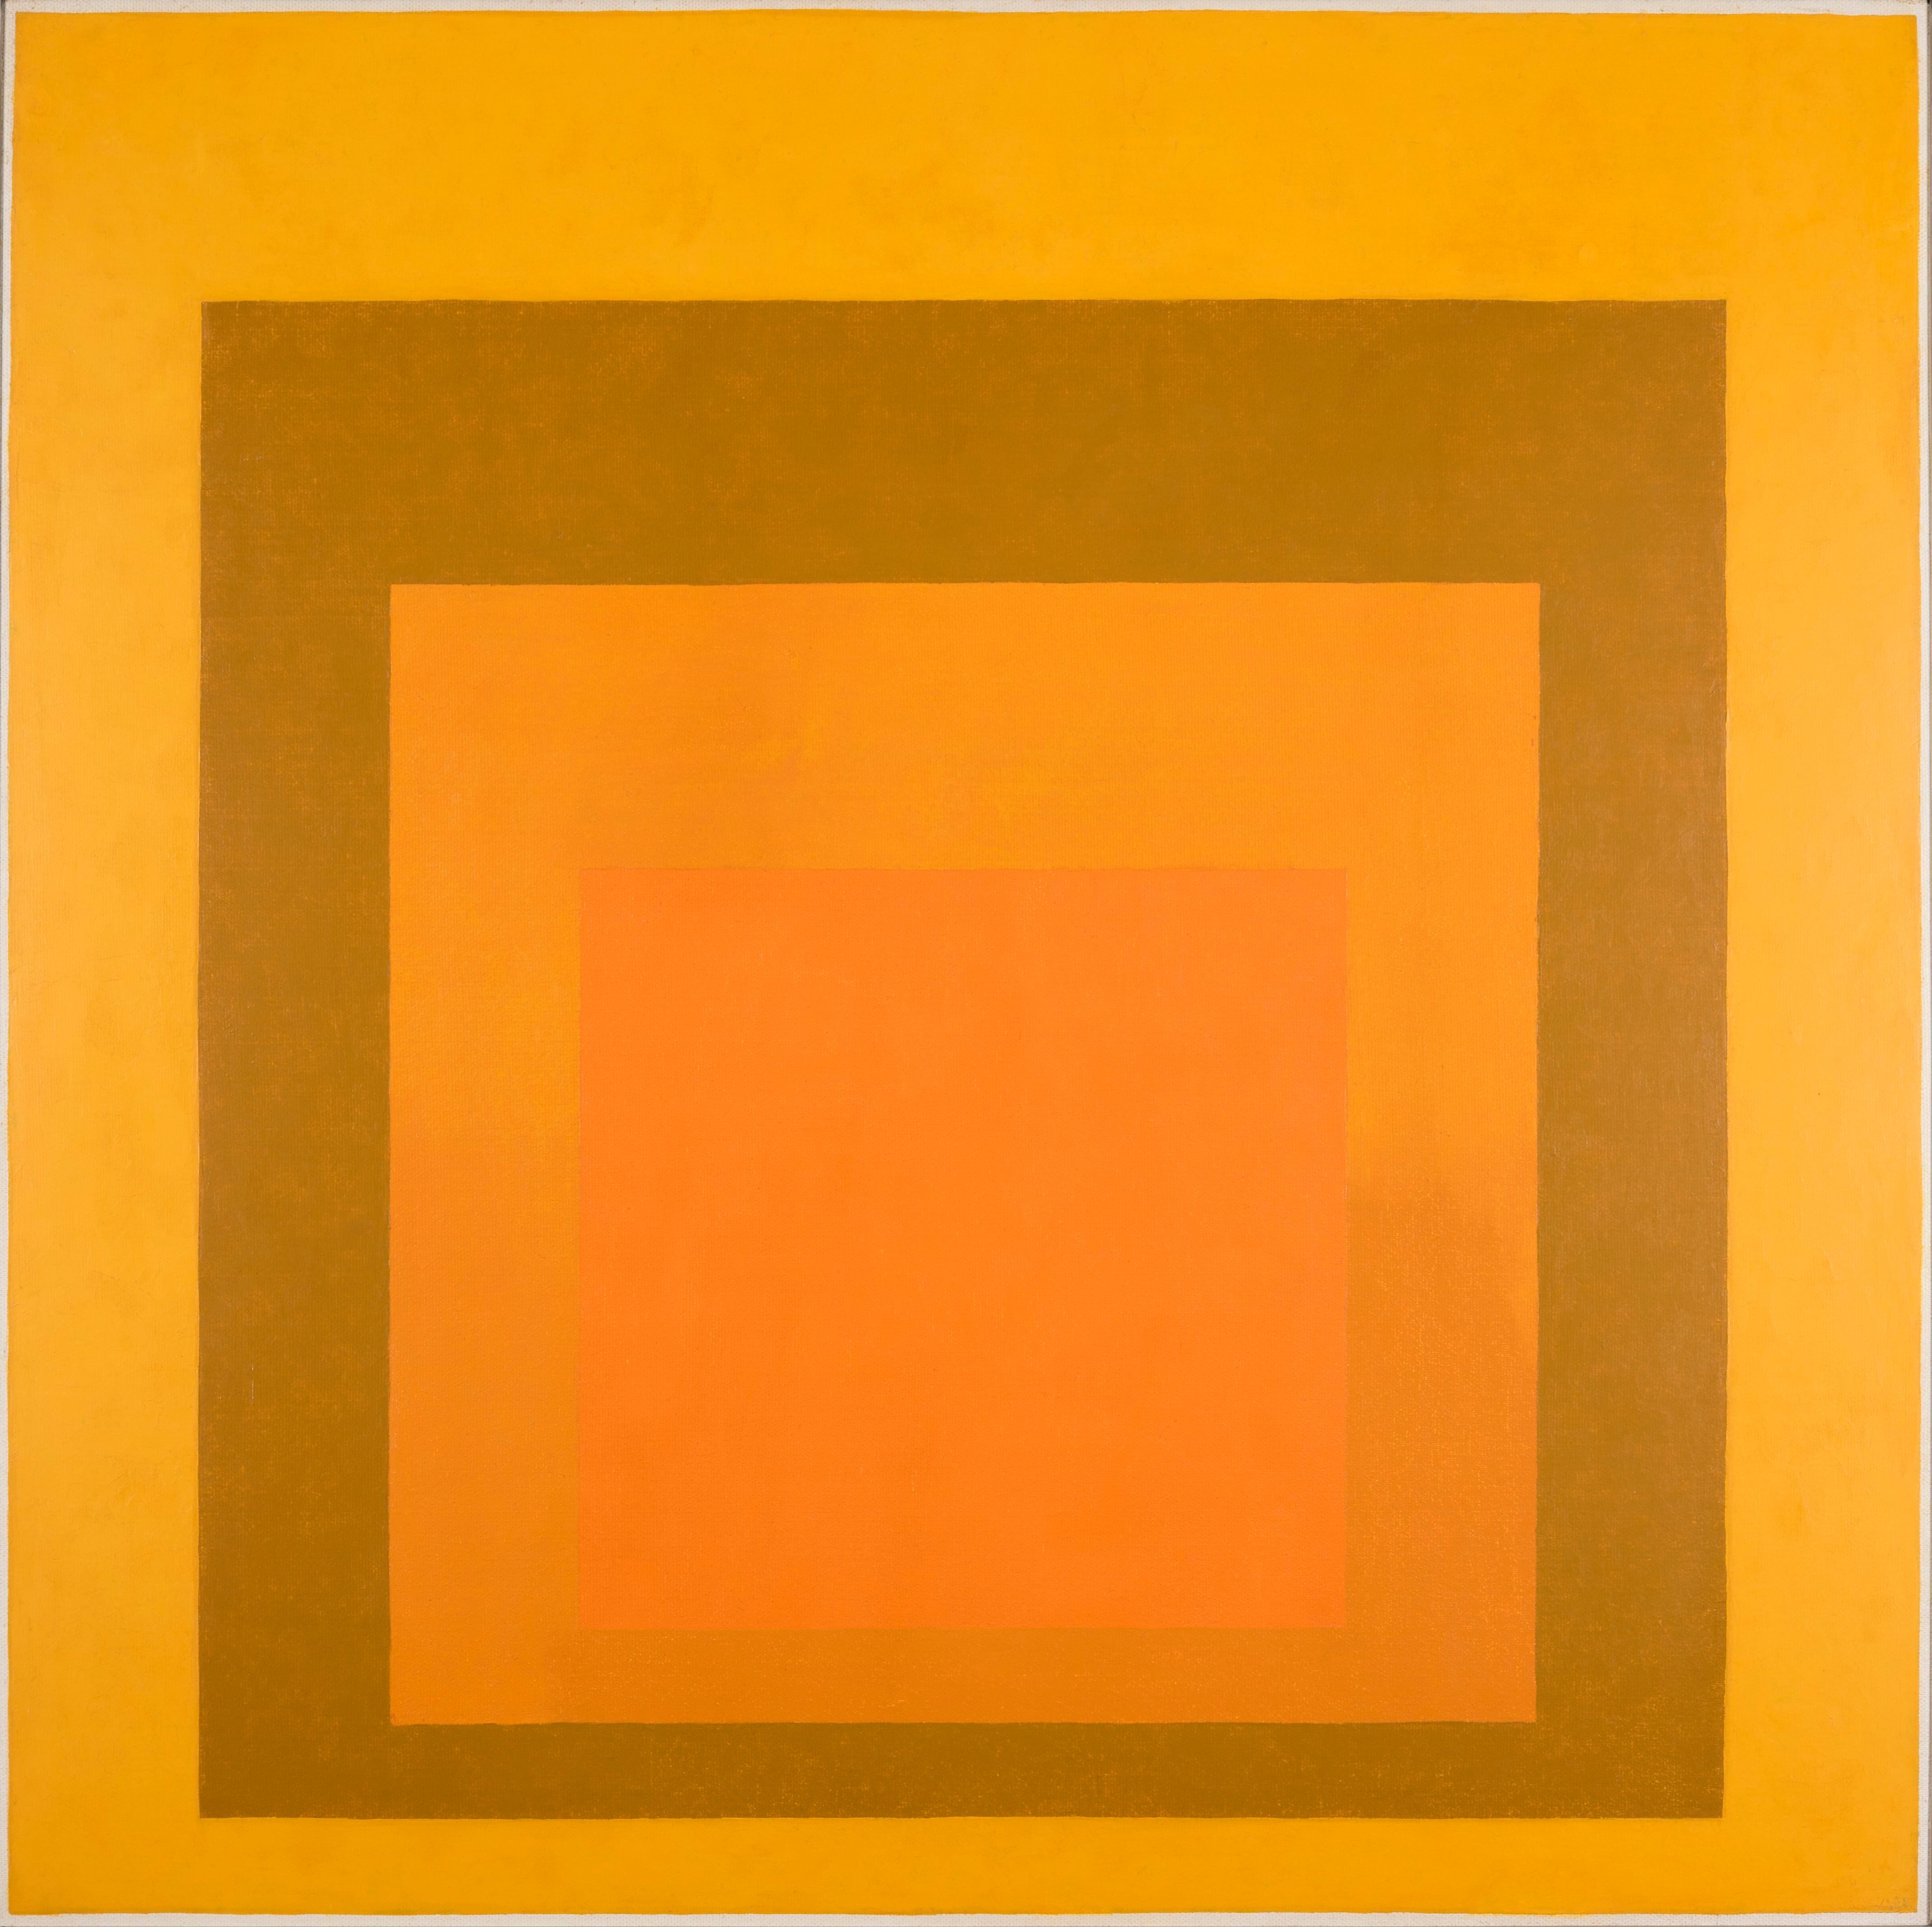 'Homage to the Square: Amber Setting', (1959) del artista Josef Albers